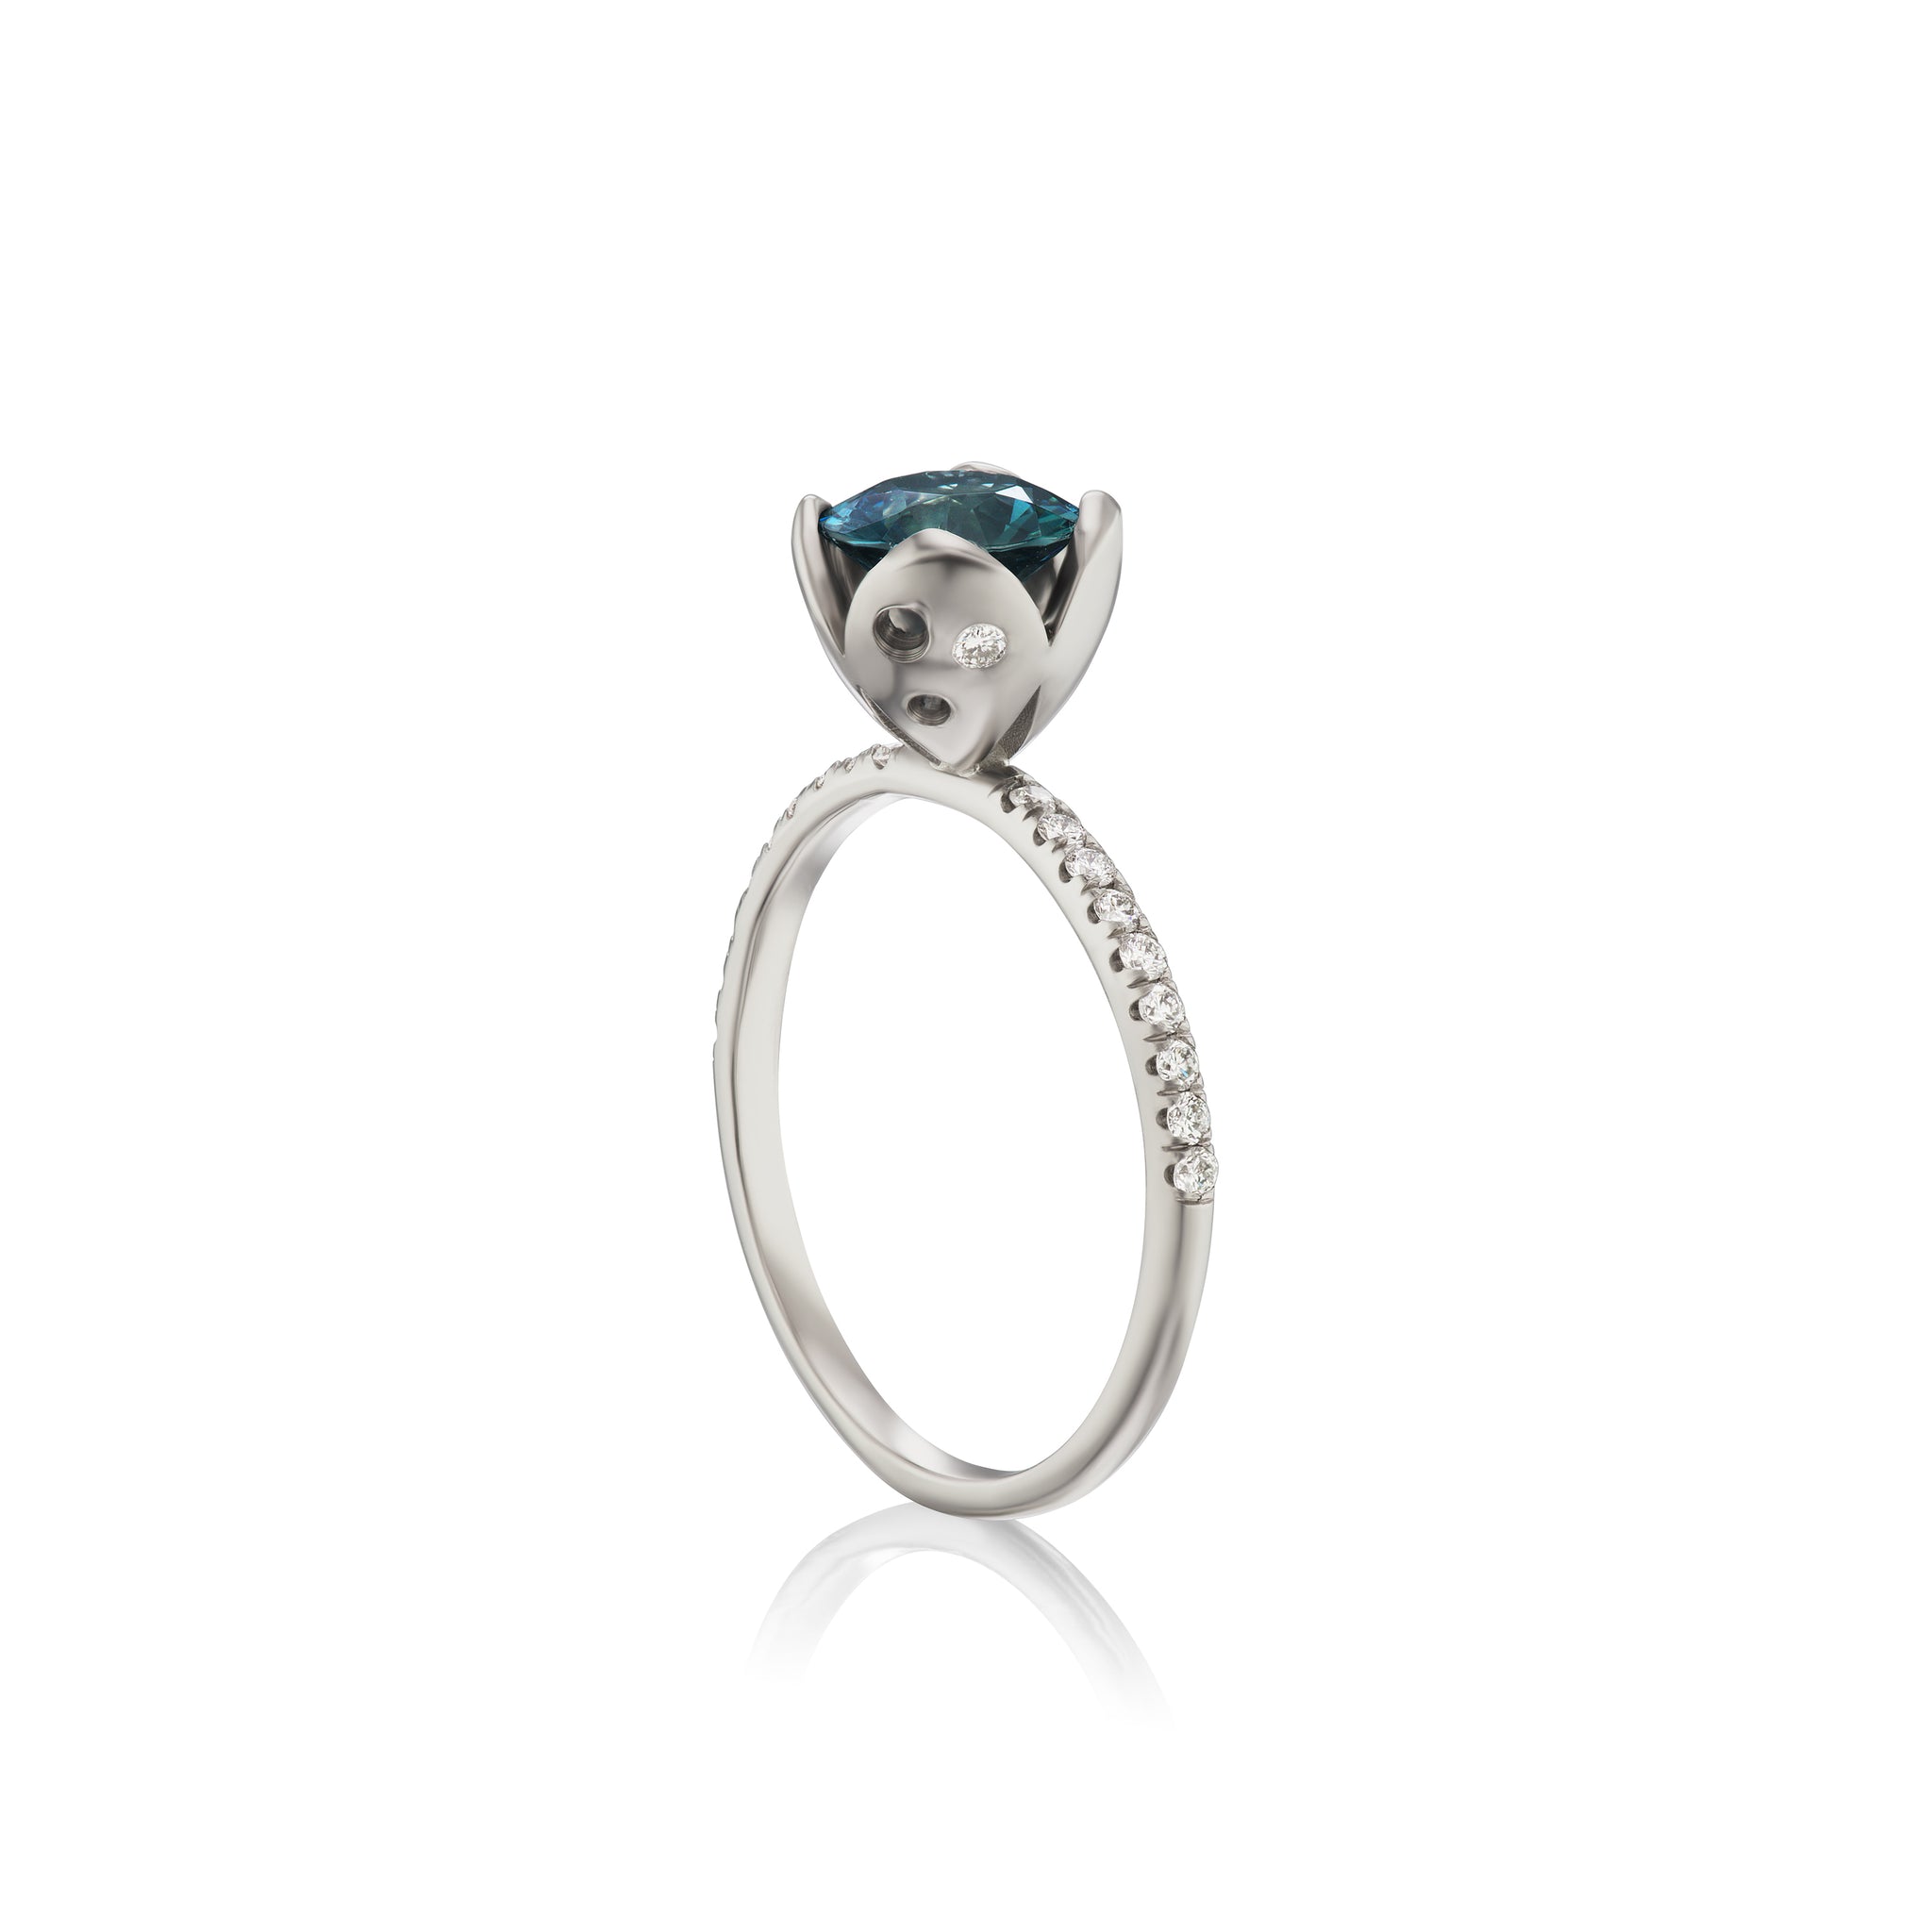 Petal-Set Solitaire Ring with Blue Montana Sapphire